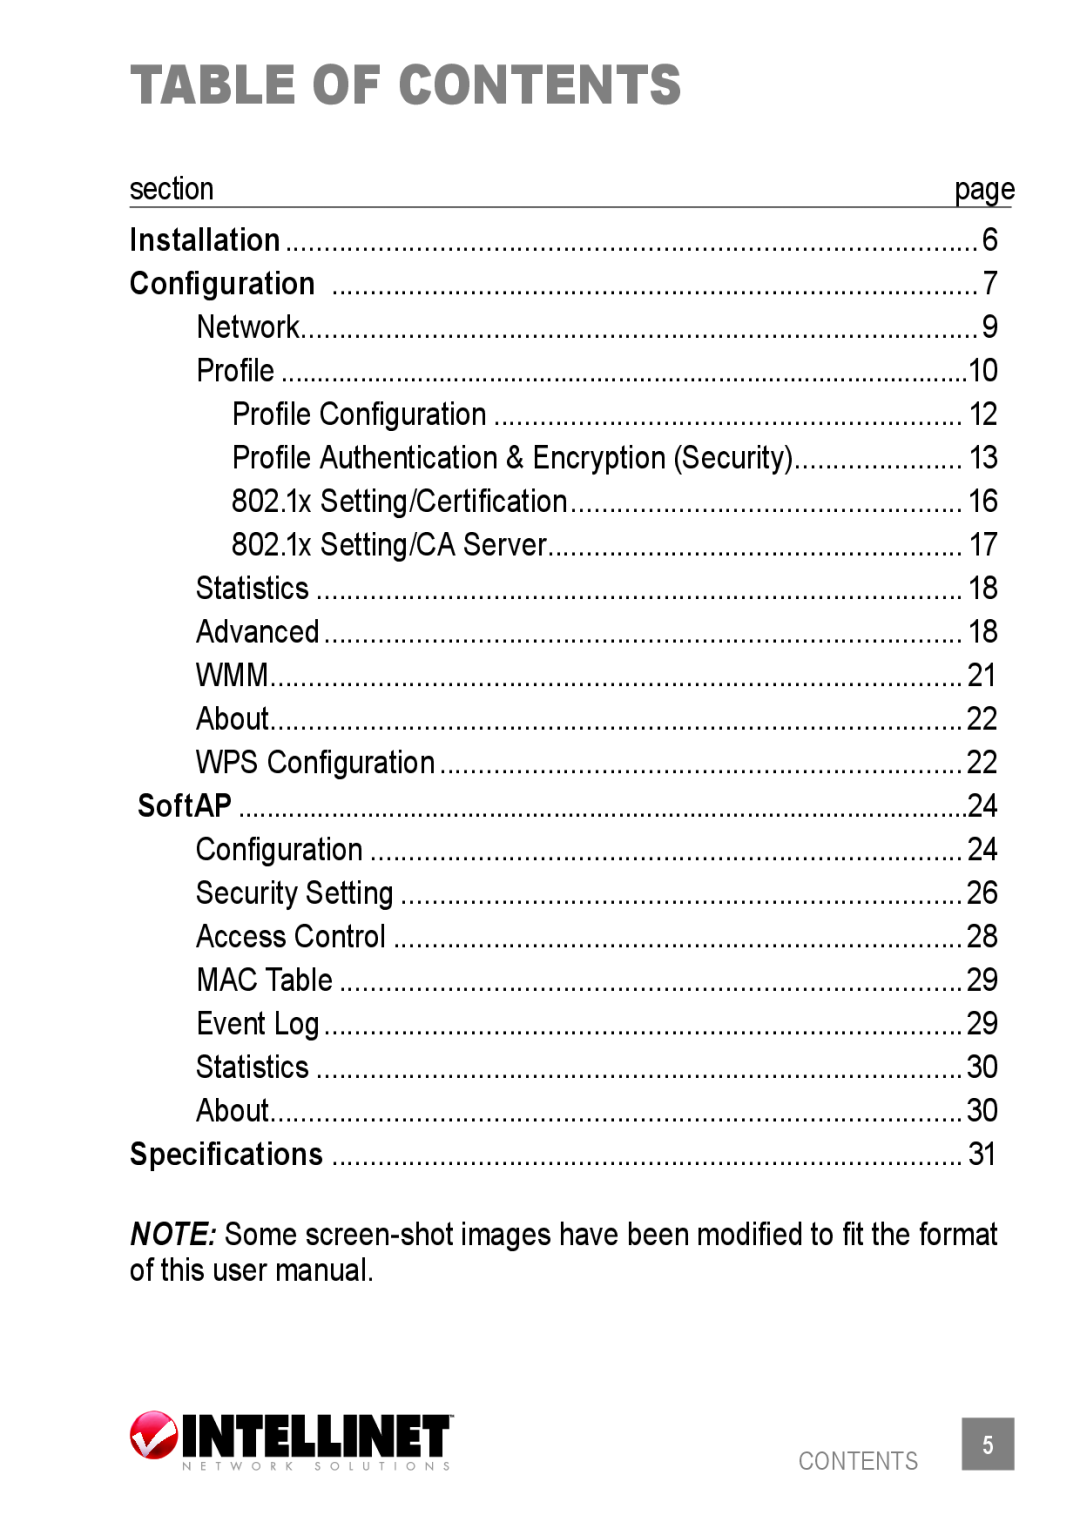 Intellinet Network Solutions 524438 table of contents, section, page, Profile Configuration, 802.1x Setting/Certification 